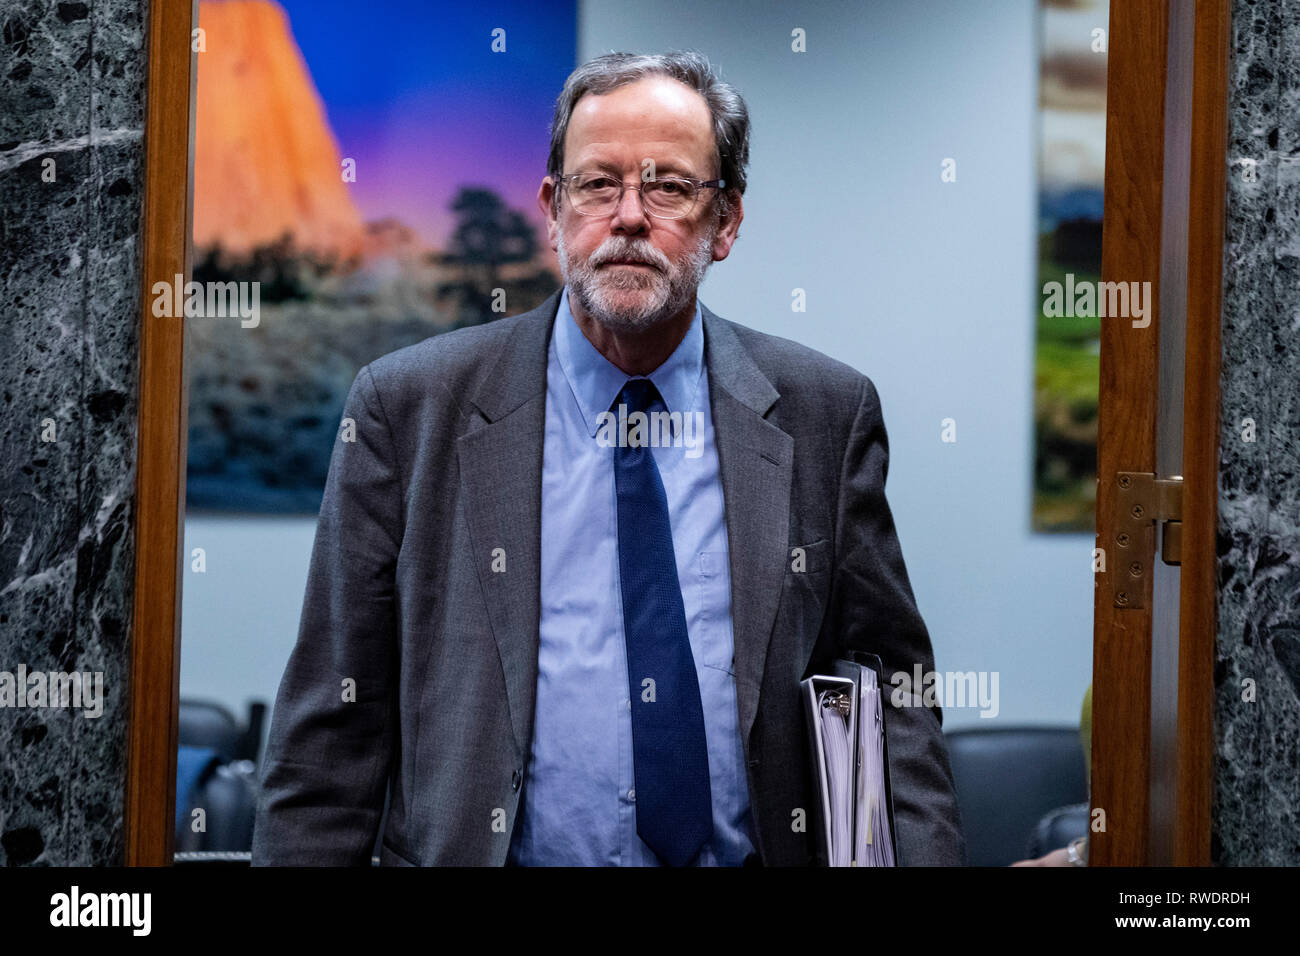 Congressional Budget Office Director Keith Hall arrives before testifying before the Senate Budget Committee on Capitol Hill in Washington, DC on January 29, 2019. Stock Photo